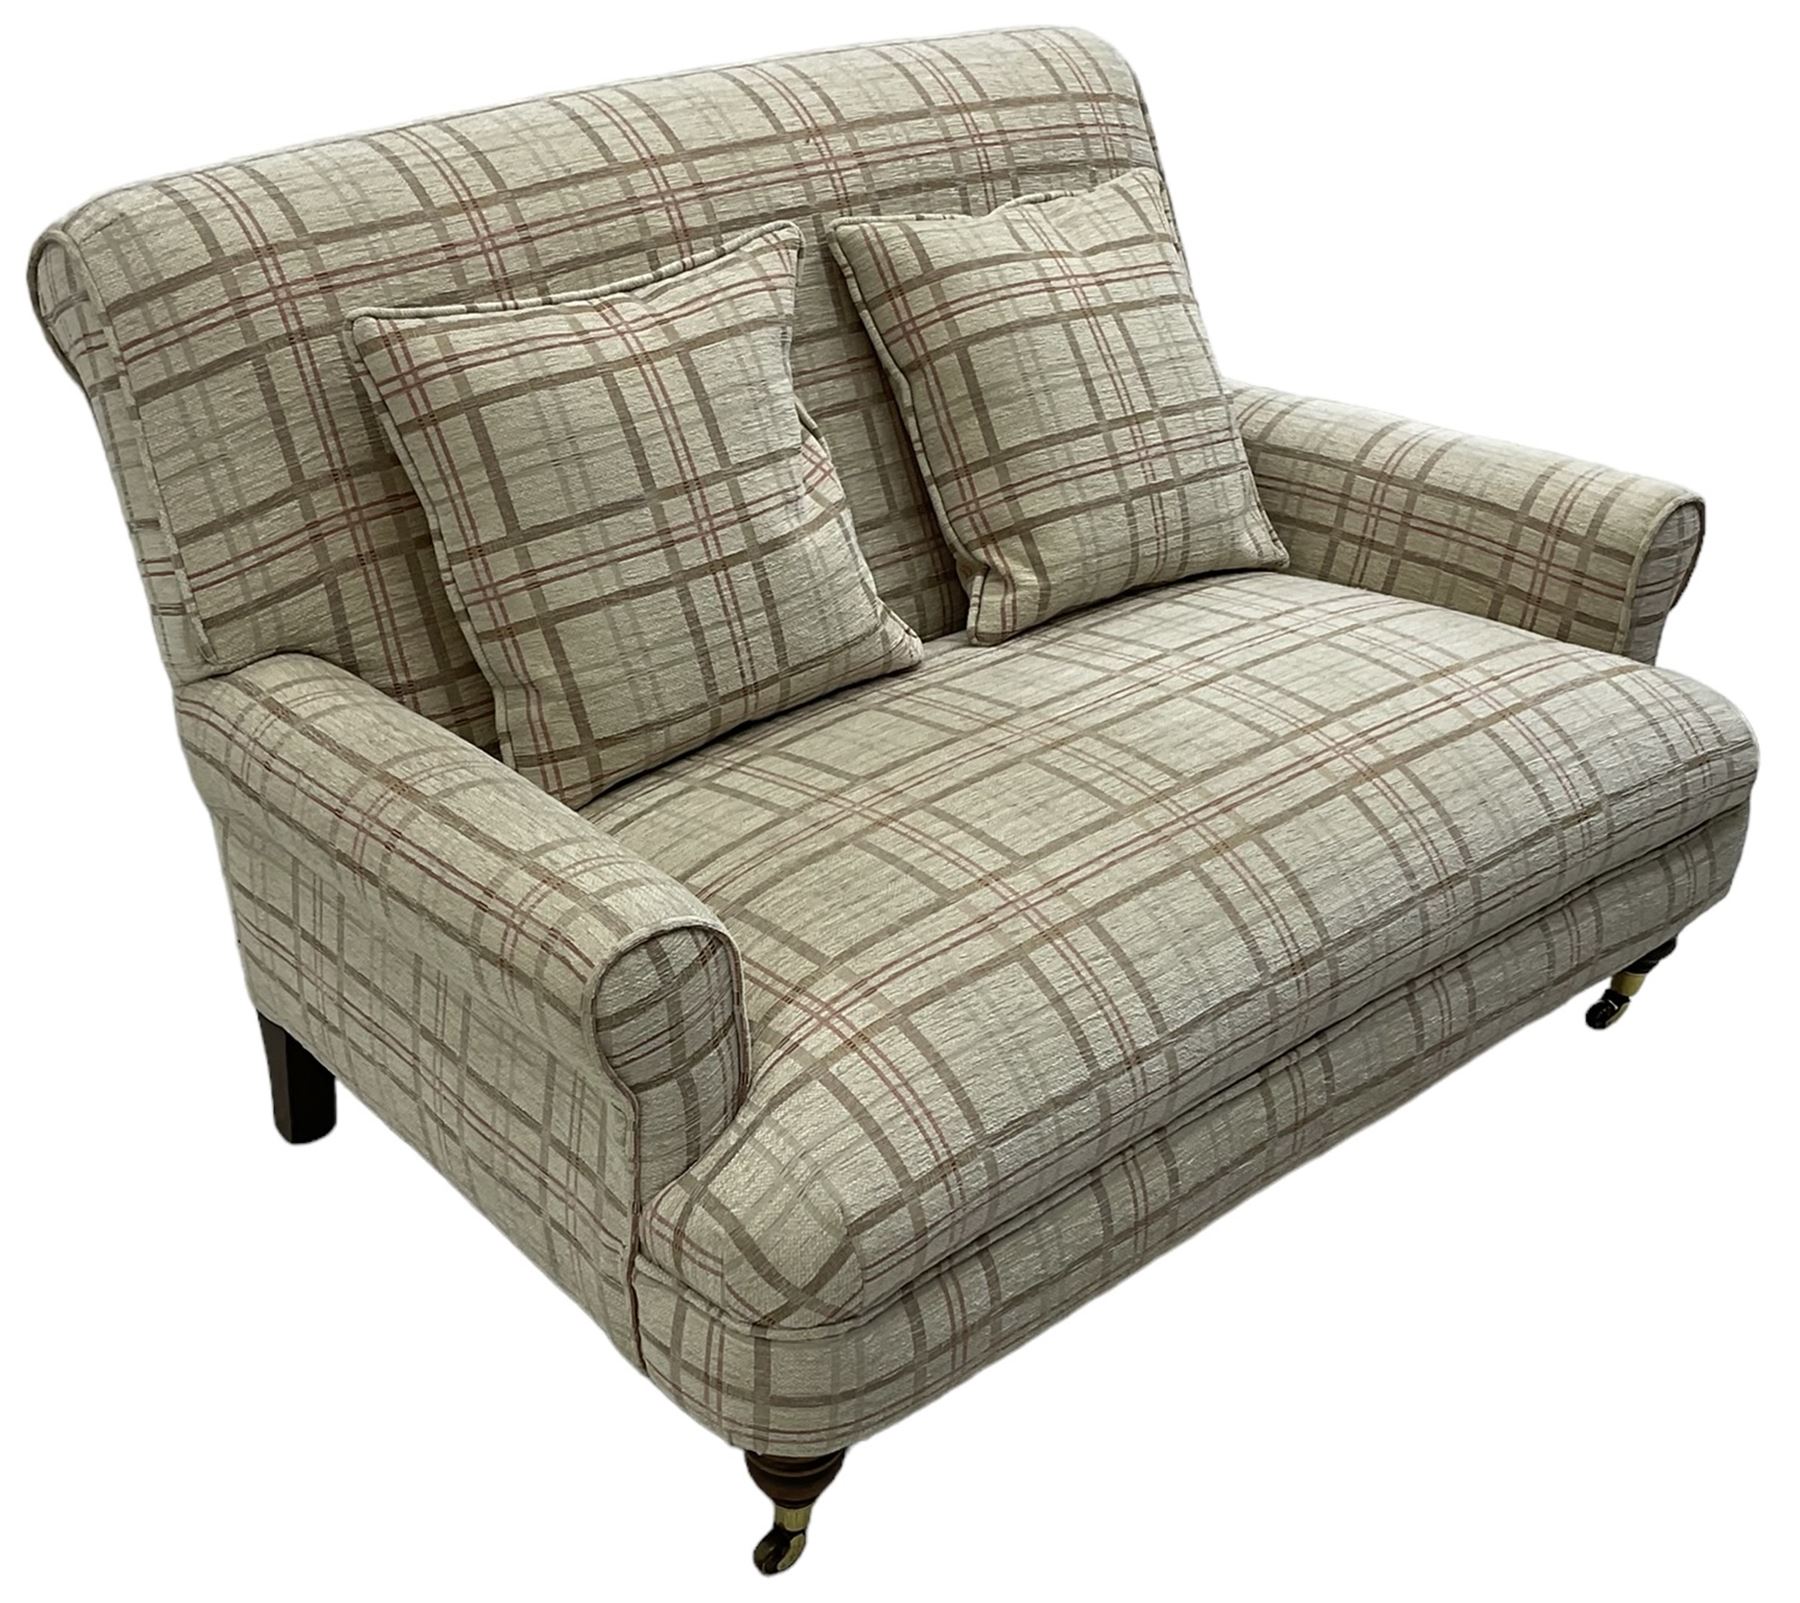 Traditionally shaped two-seat sofa - Image 4 of 4